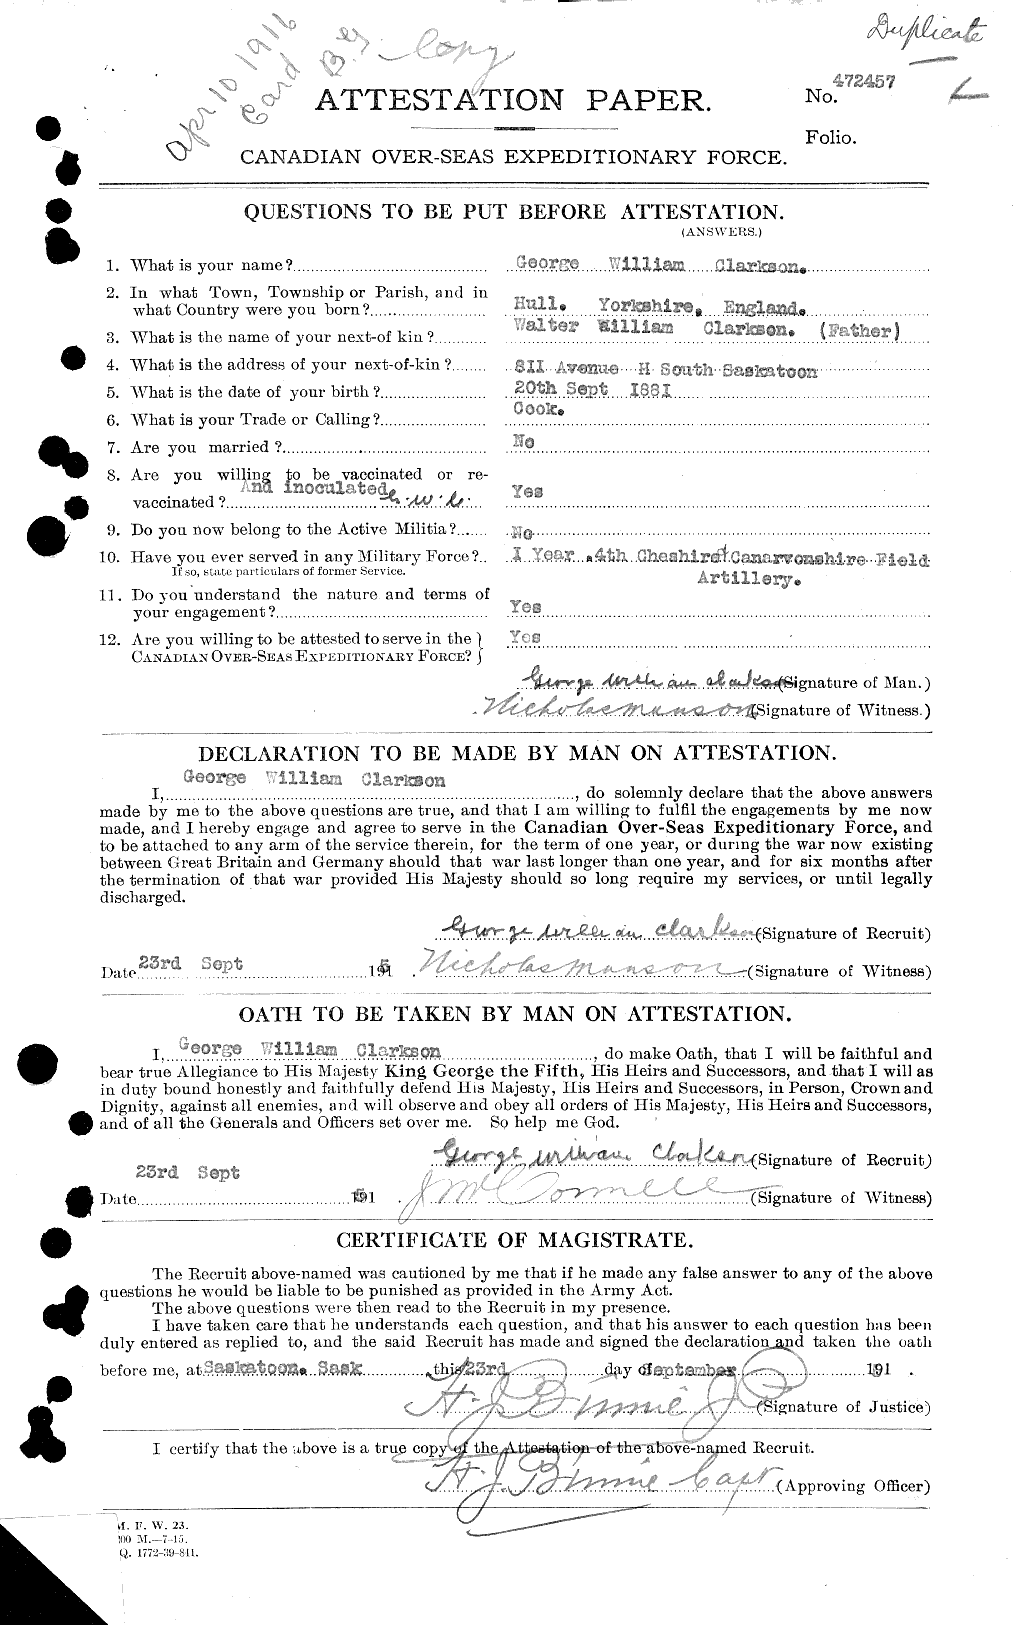 Personnel Records of the First World War - CEF 021432a